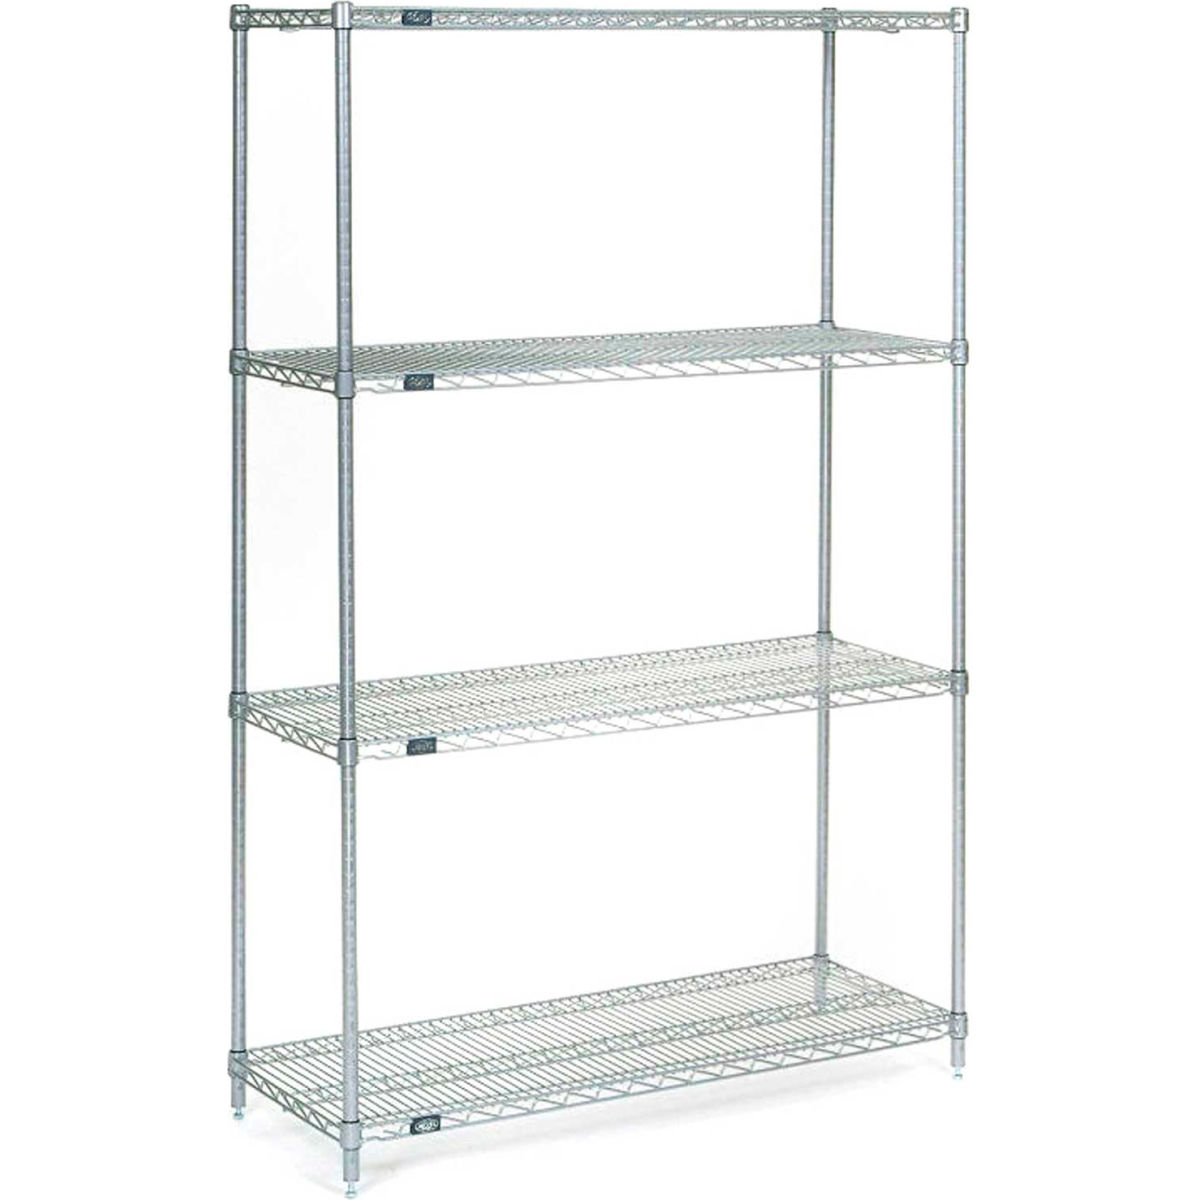 Picture of Global Industrial 14545S 54 x 54 x 14 in. Nexel Stainless Steel Starter Wire Shelving